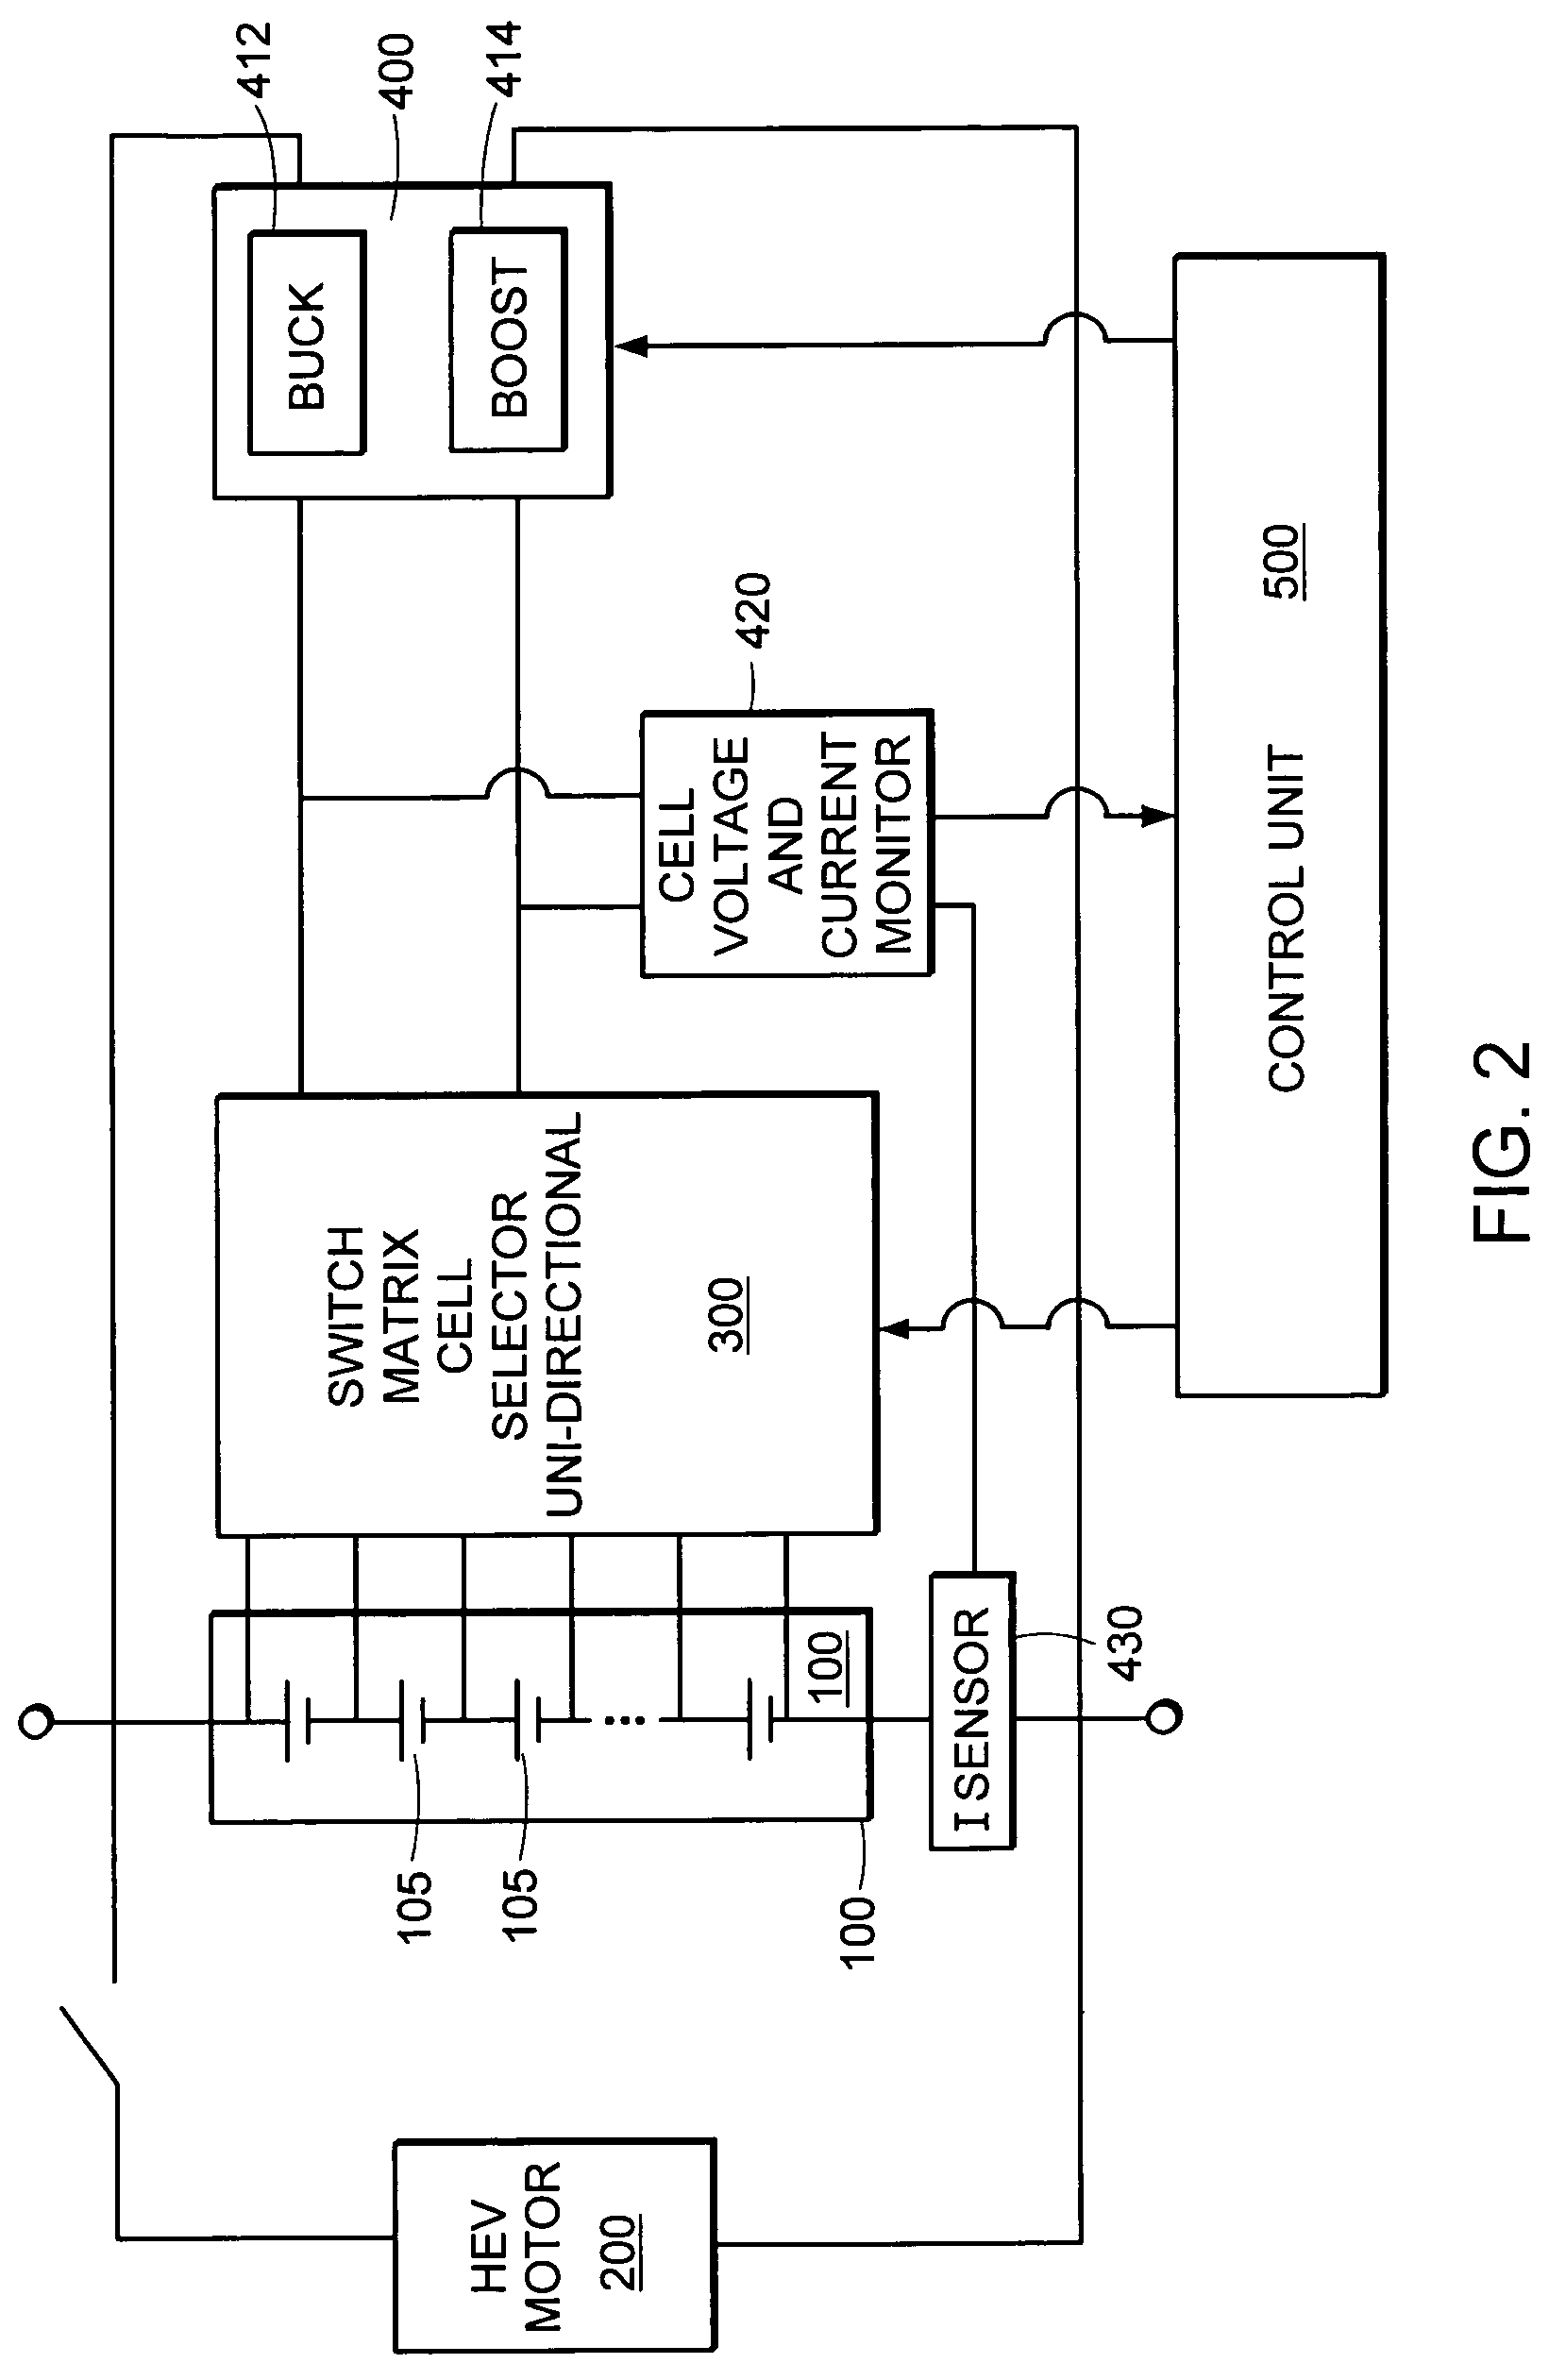 System and method for balancing state of charge among series-connected electrical energy storage units